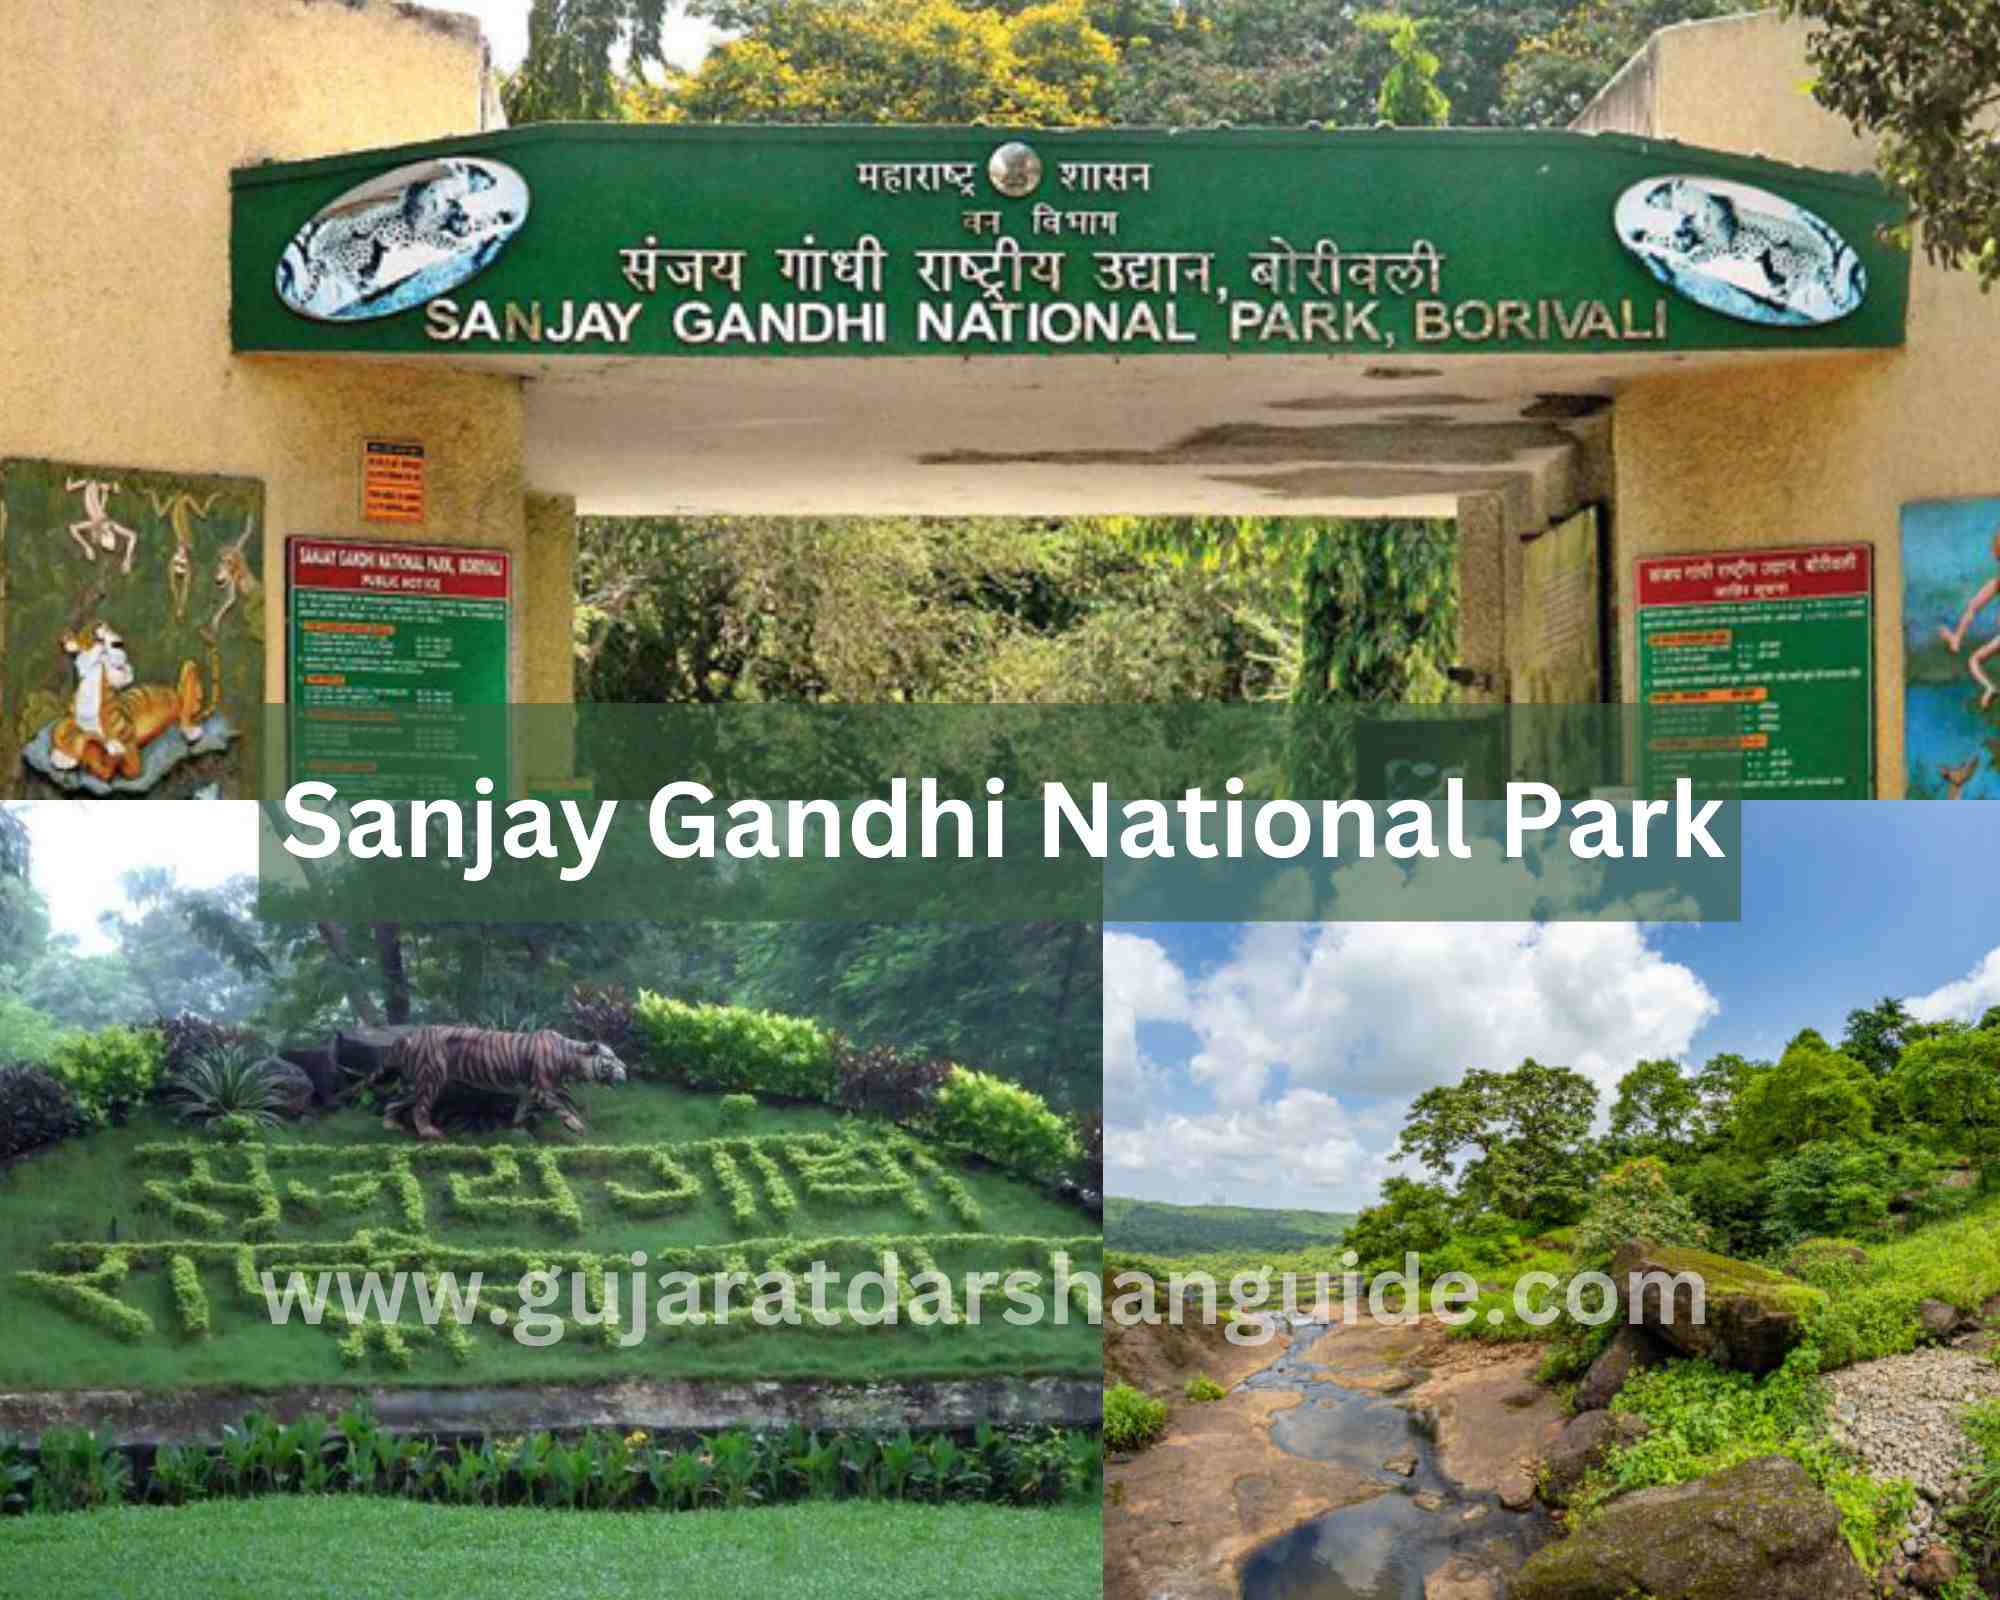 Sanjay Gandhi National Park Ticket Price, Timings, Contact Number, How